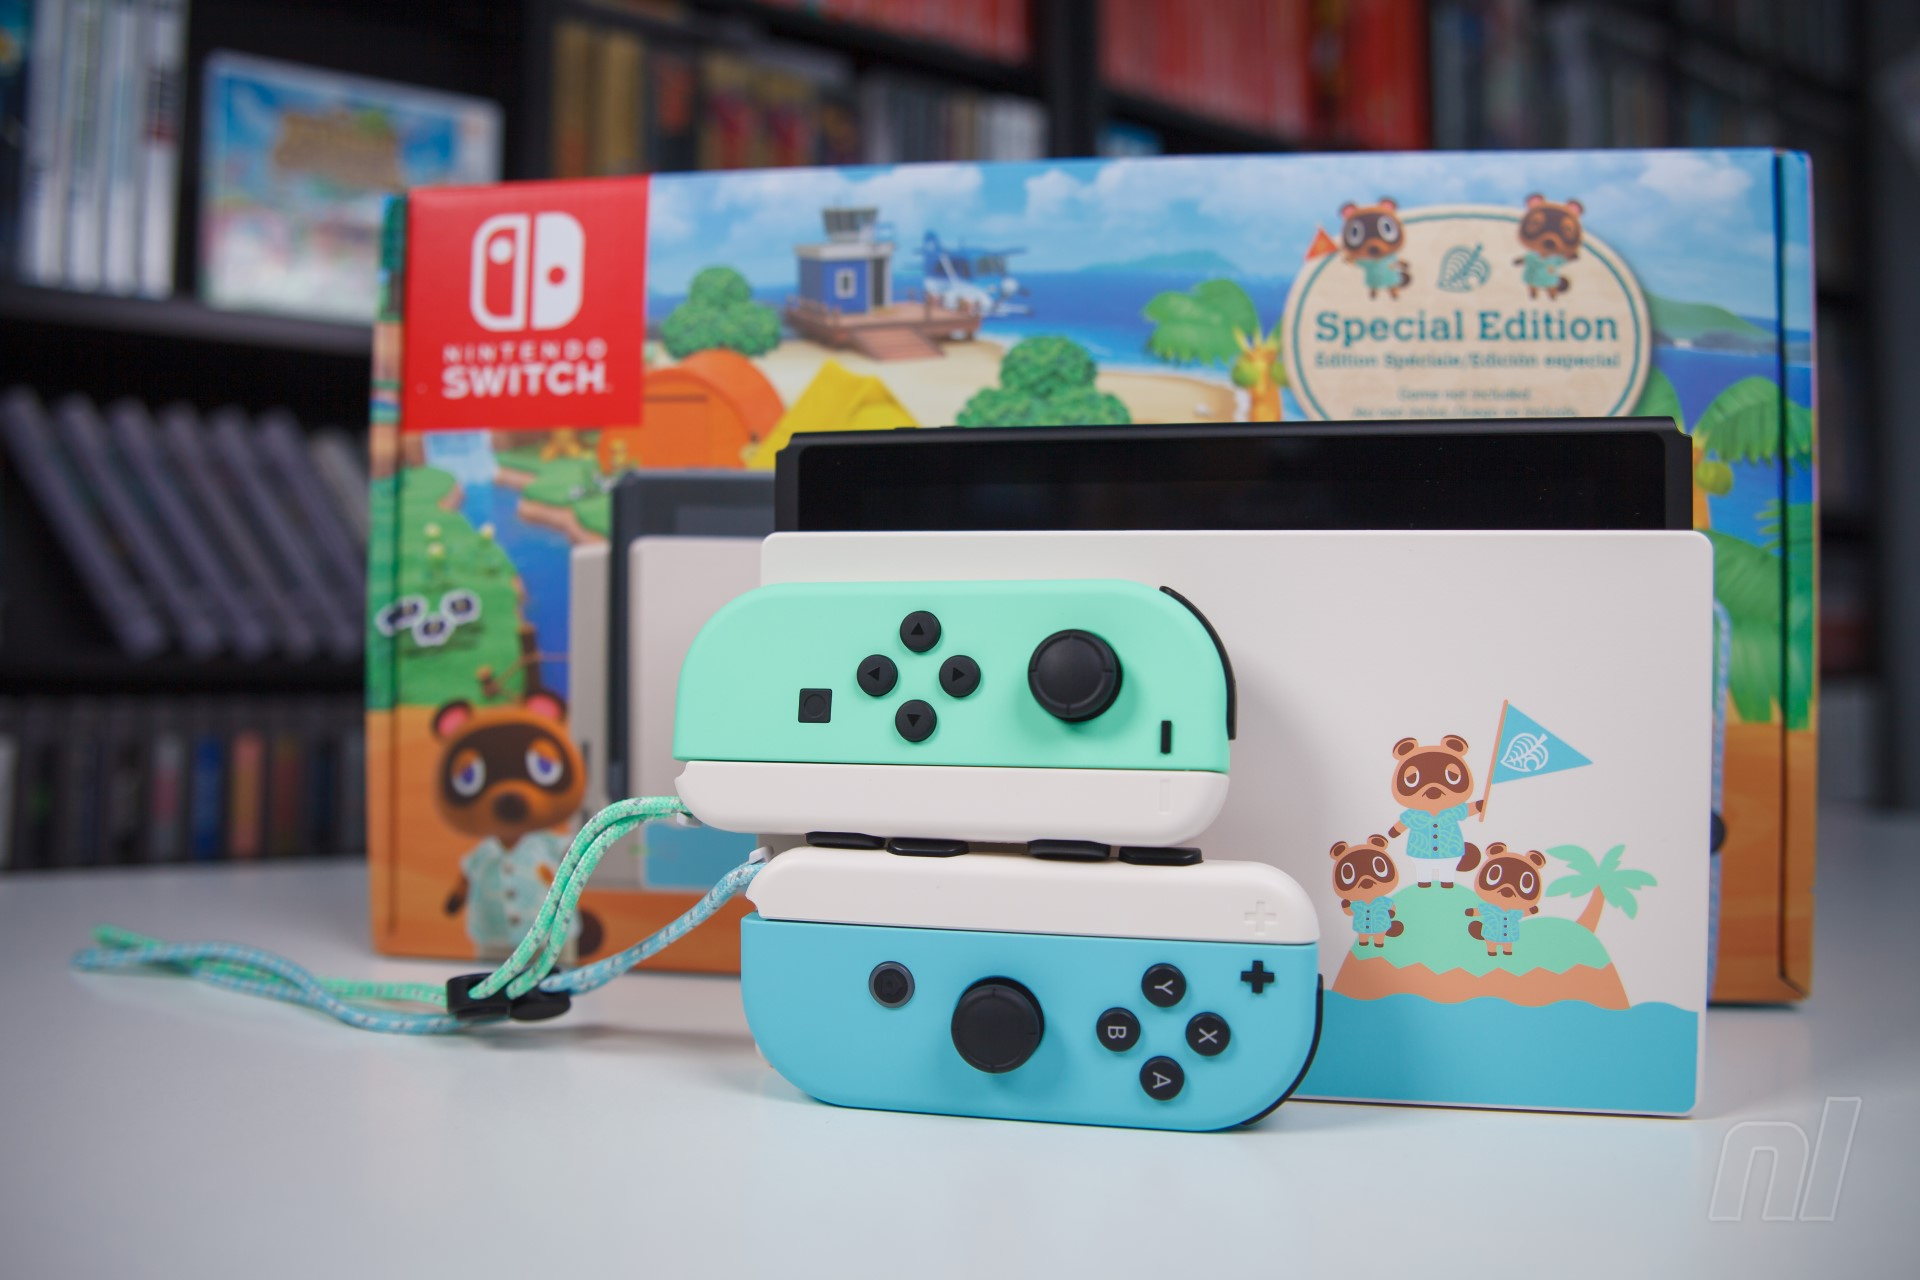 animal crossing limited edition switch uk